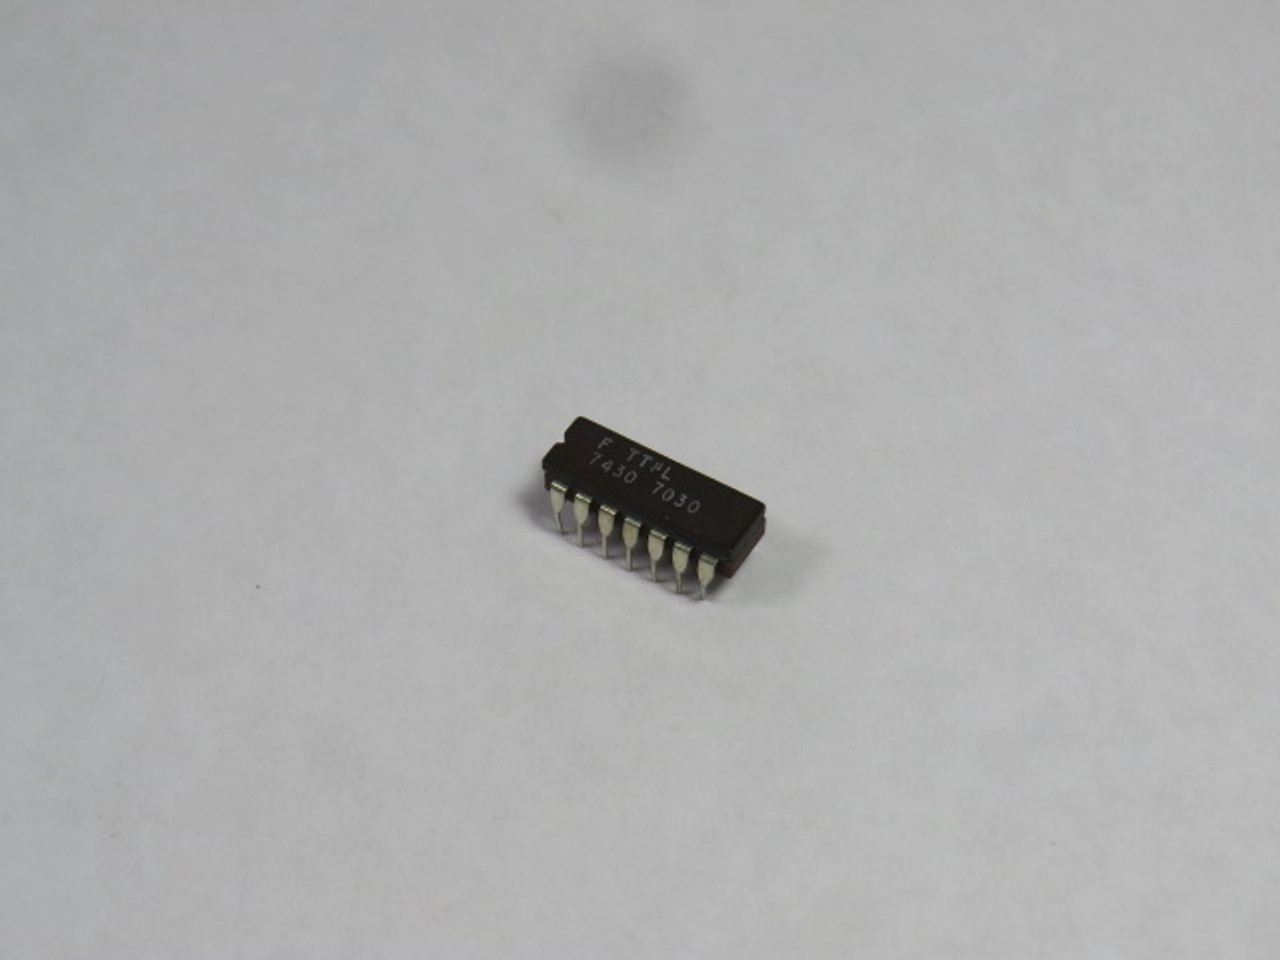 Fairchild 7430-7030 IC Chip USED